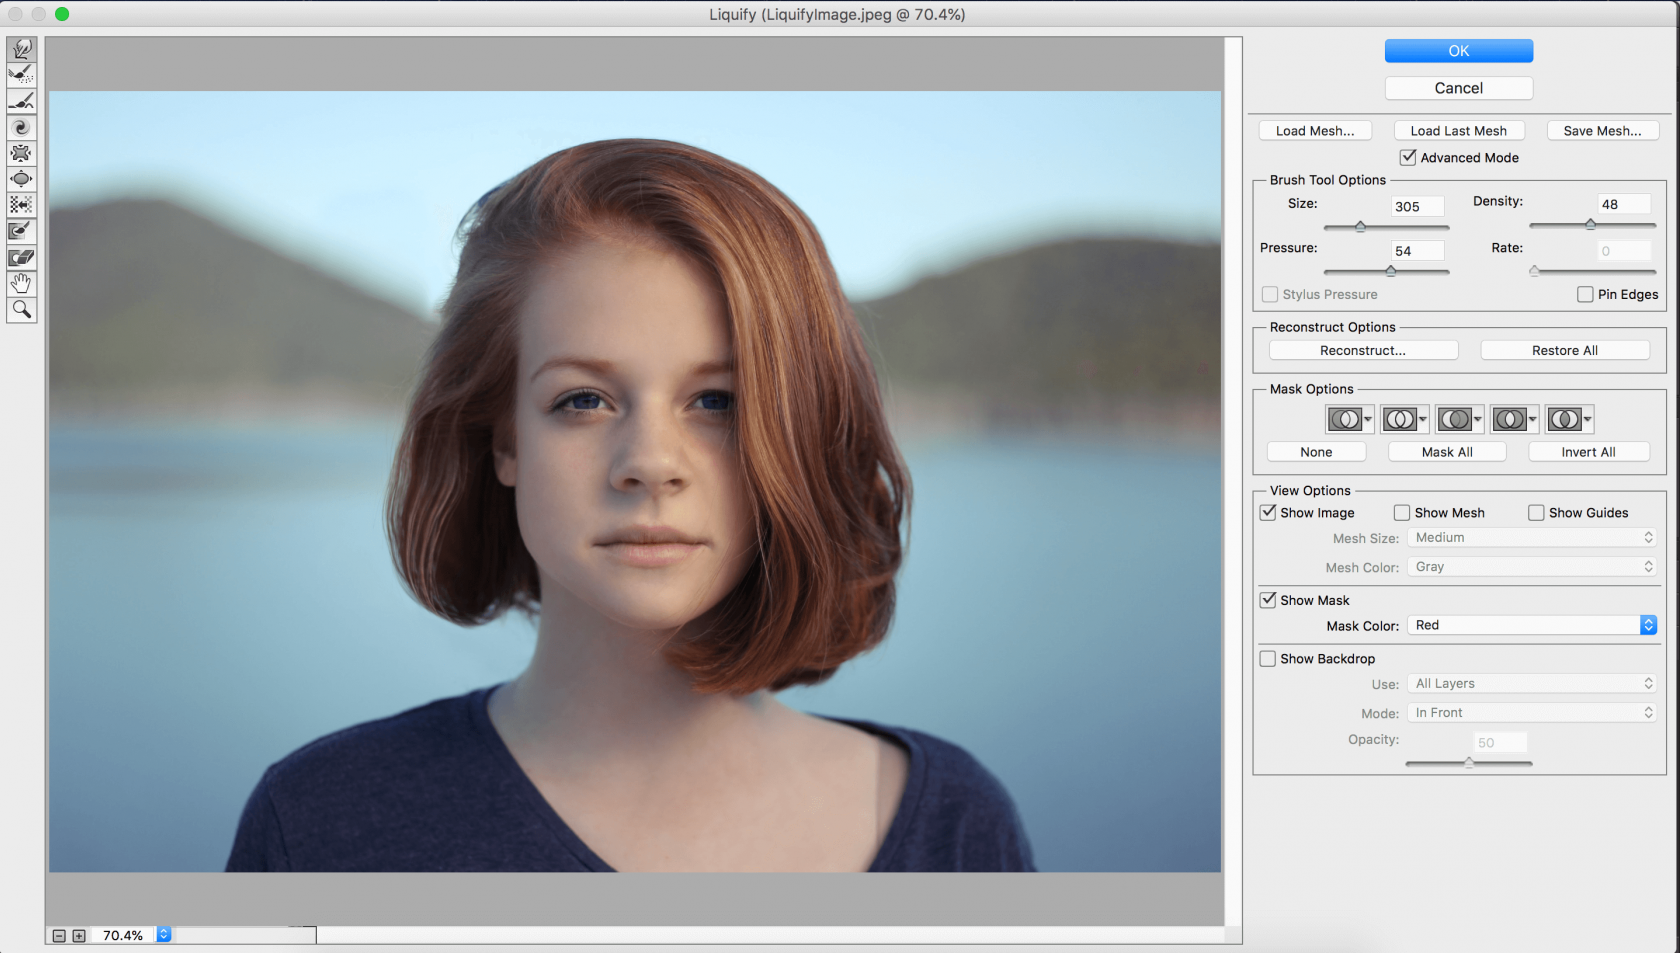 How to Use the Liquify Tool in Photoshop: Mastering the Basics Image8